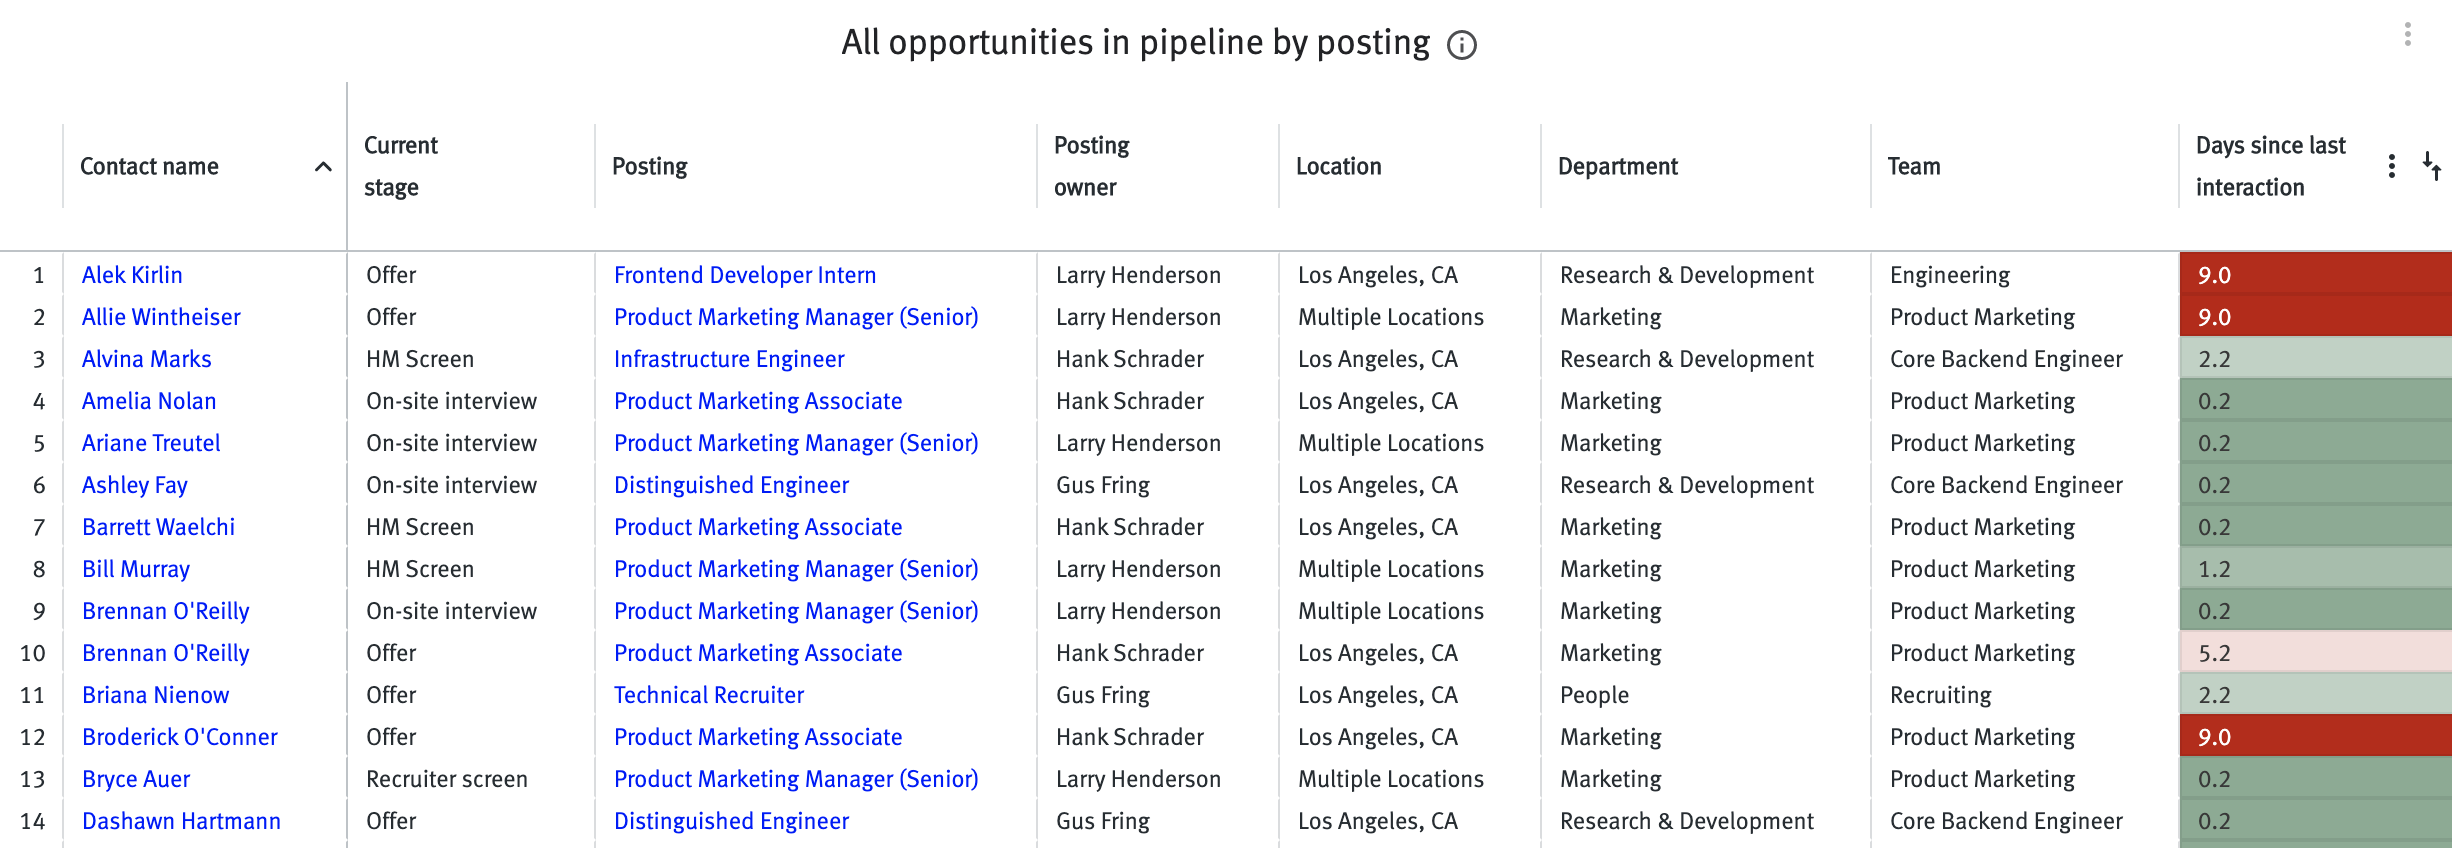 All opportunities in pipeline by posting table